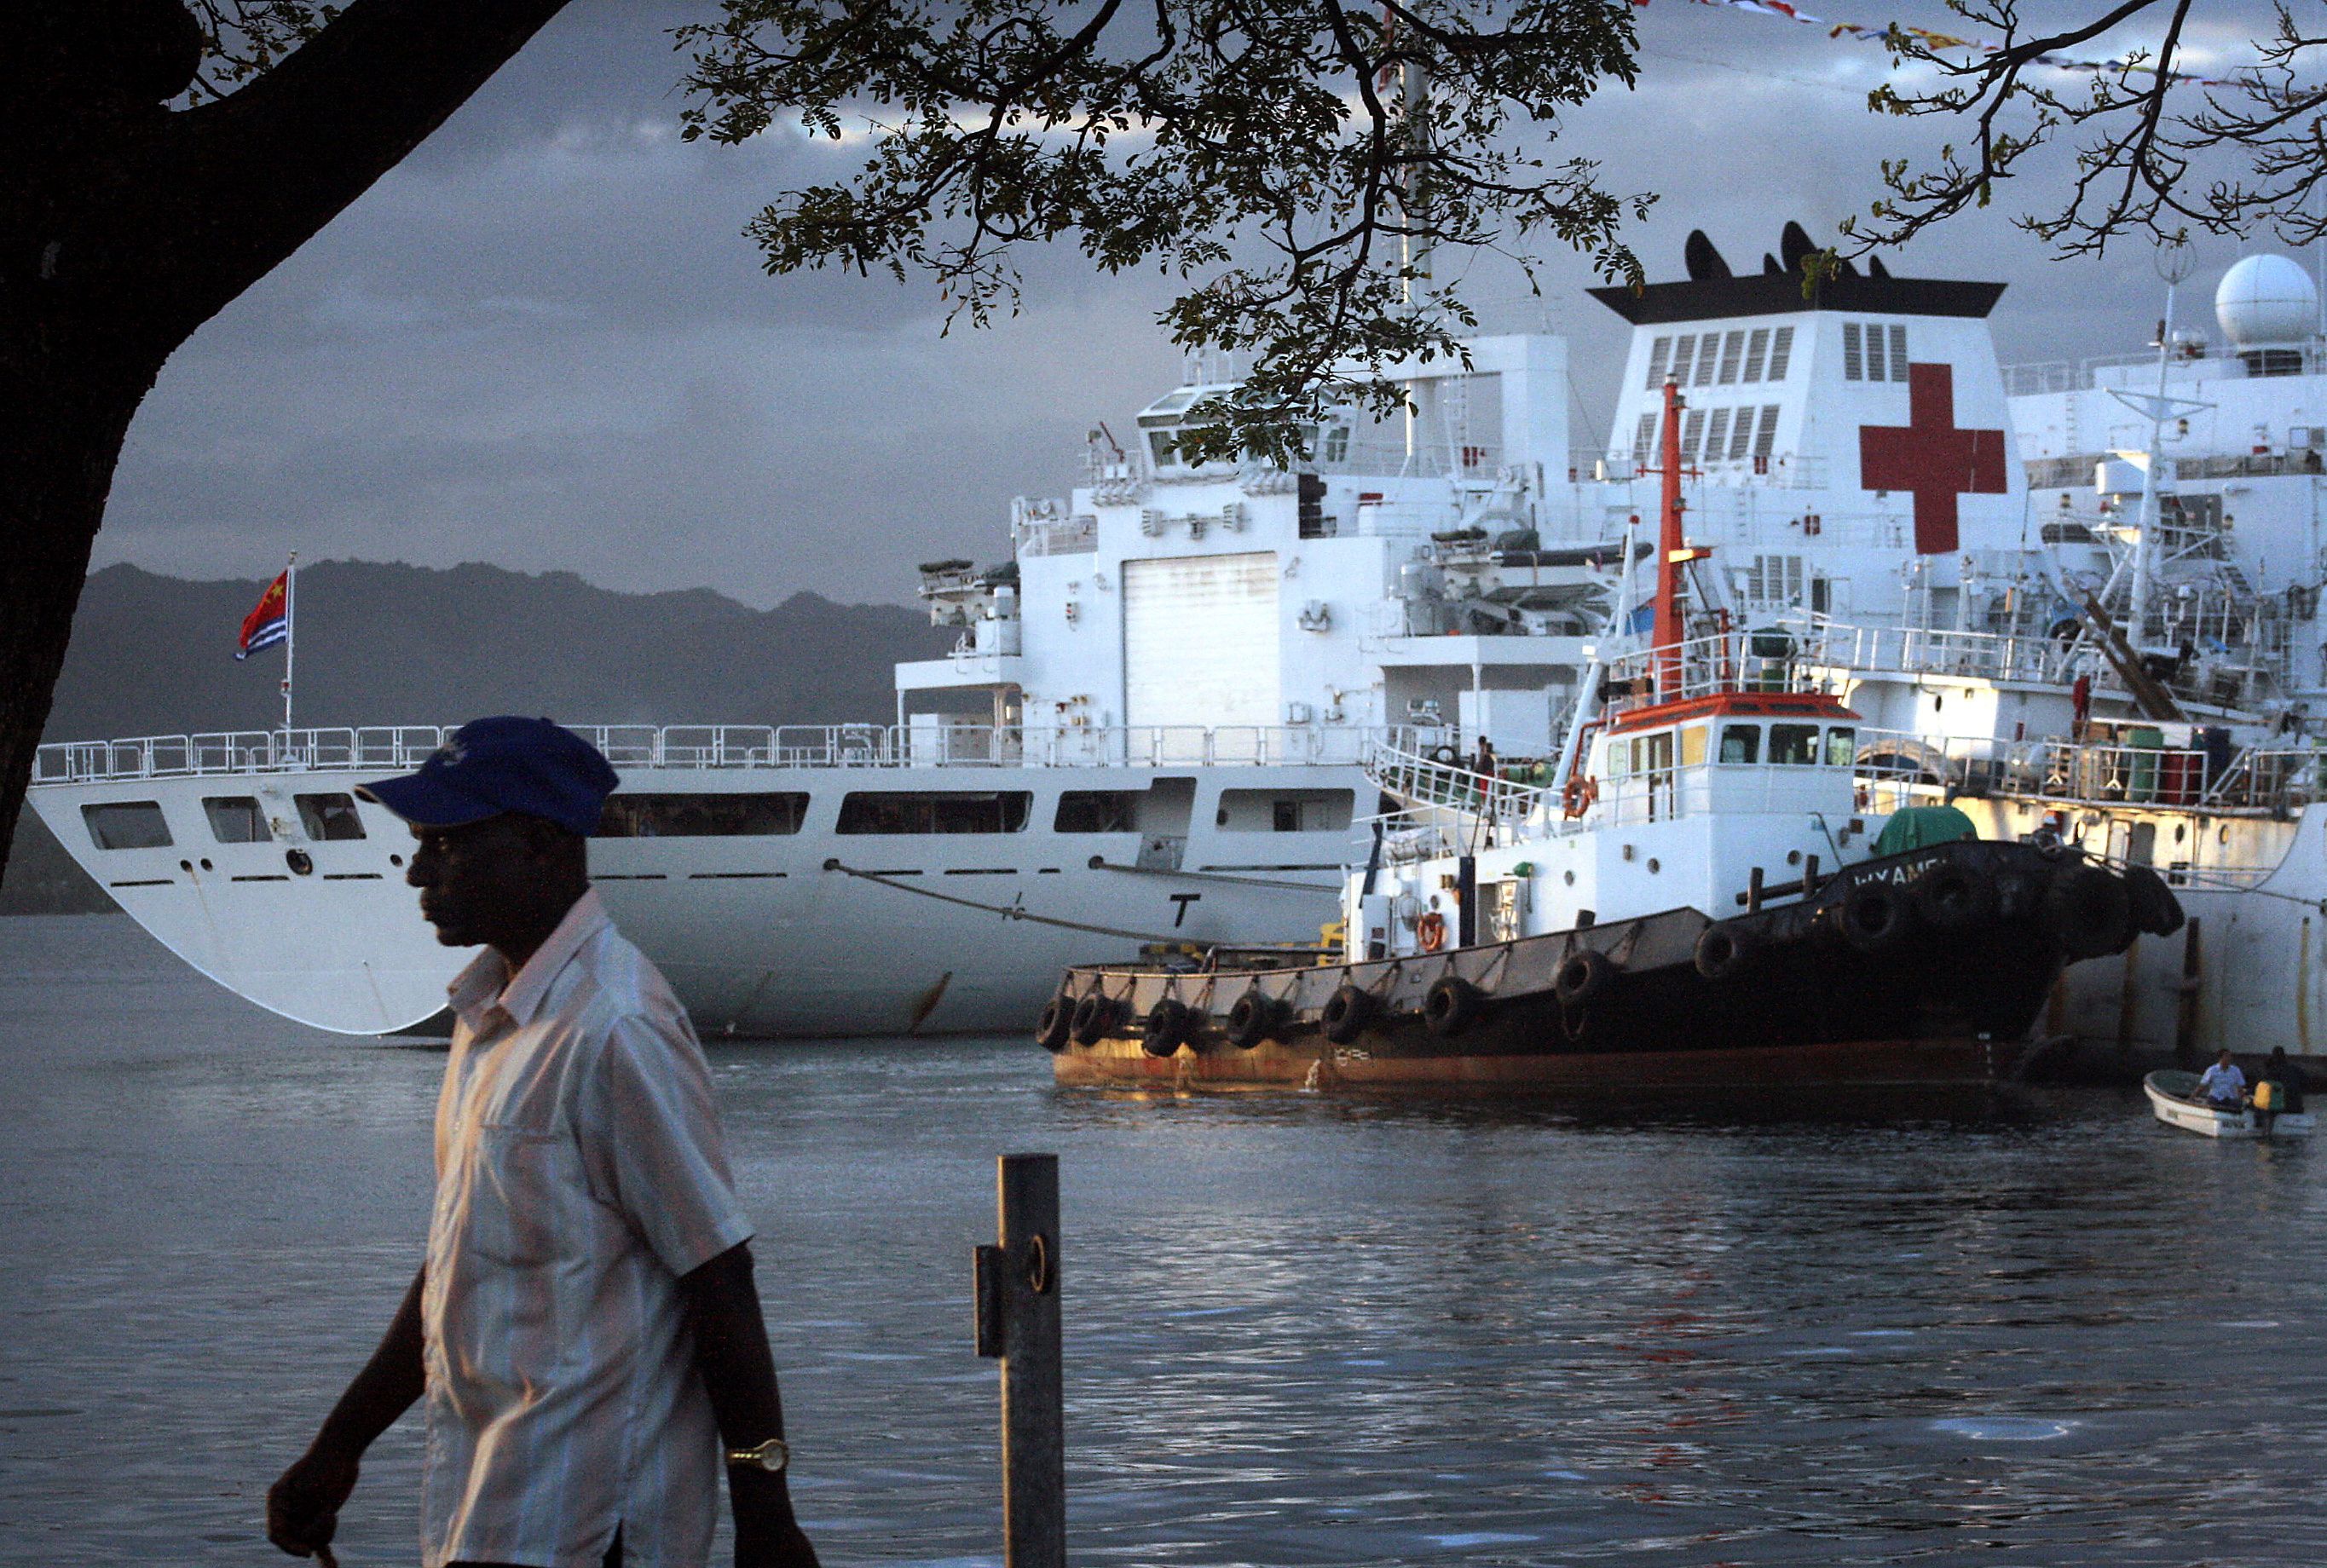 A Man walks past a Chinese hospital ship called The Peace Ark, which offers free health care as it sails through the South Pacific, as it sits moored in the harbour of the Fiji capital of Suv